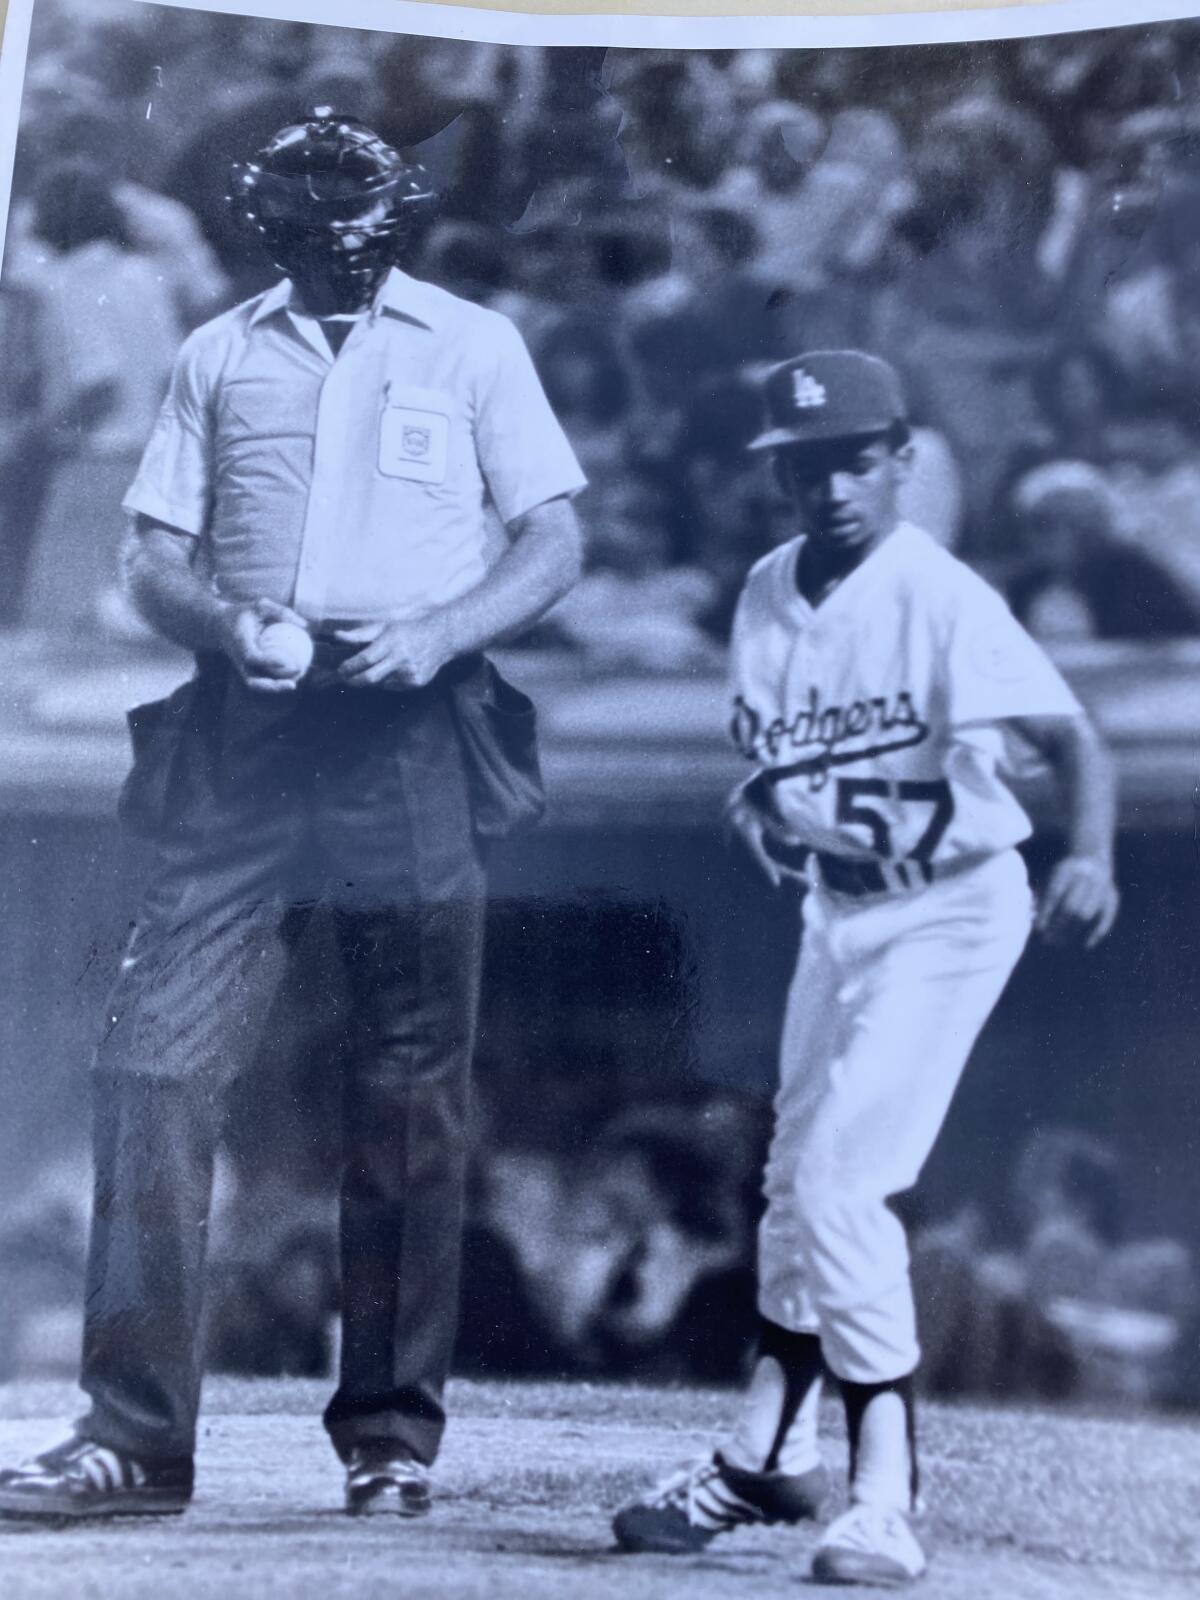 A boy in a Dodgers uniform stands next to an umpire on the field.